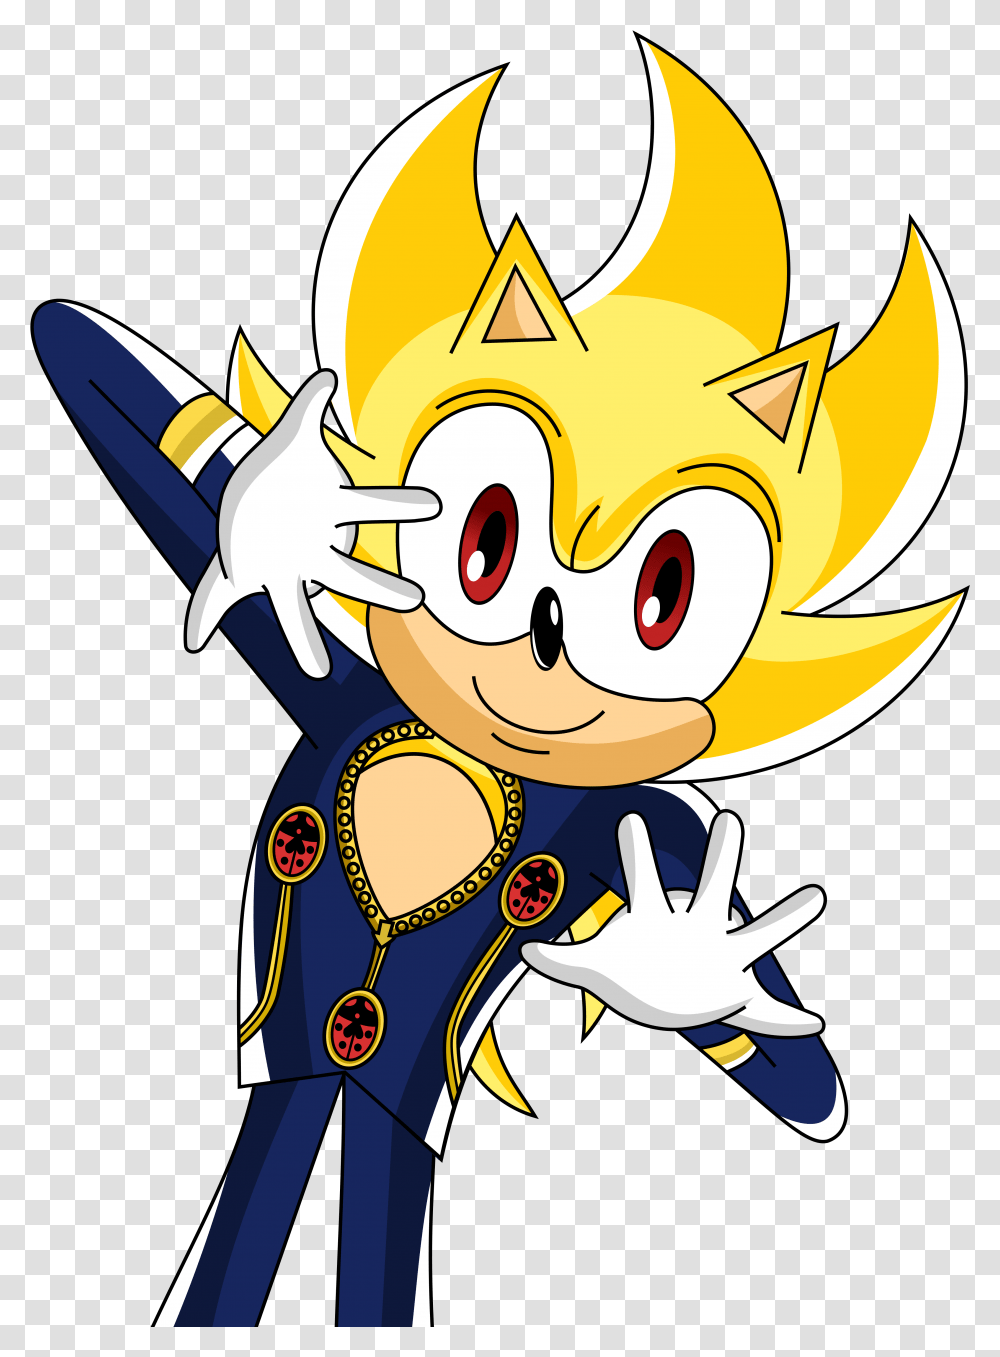 Super Sonic As Giorno Giovanna By Nupiethehero Giorno Giovanna Sonic, Performer, Art, Graphics, Magician Transparent Png